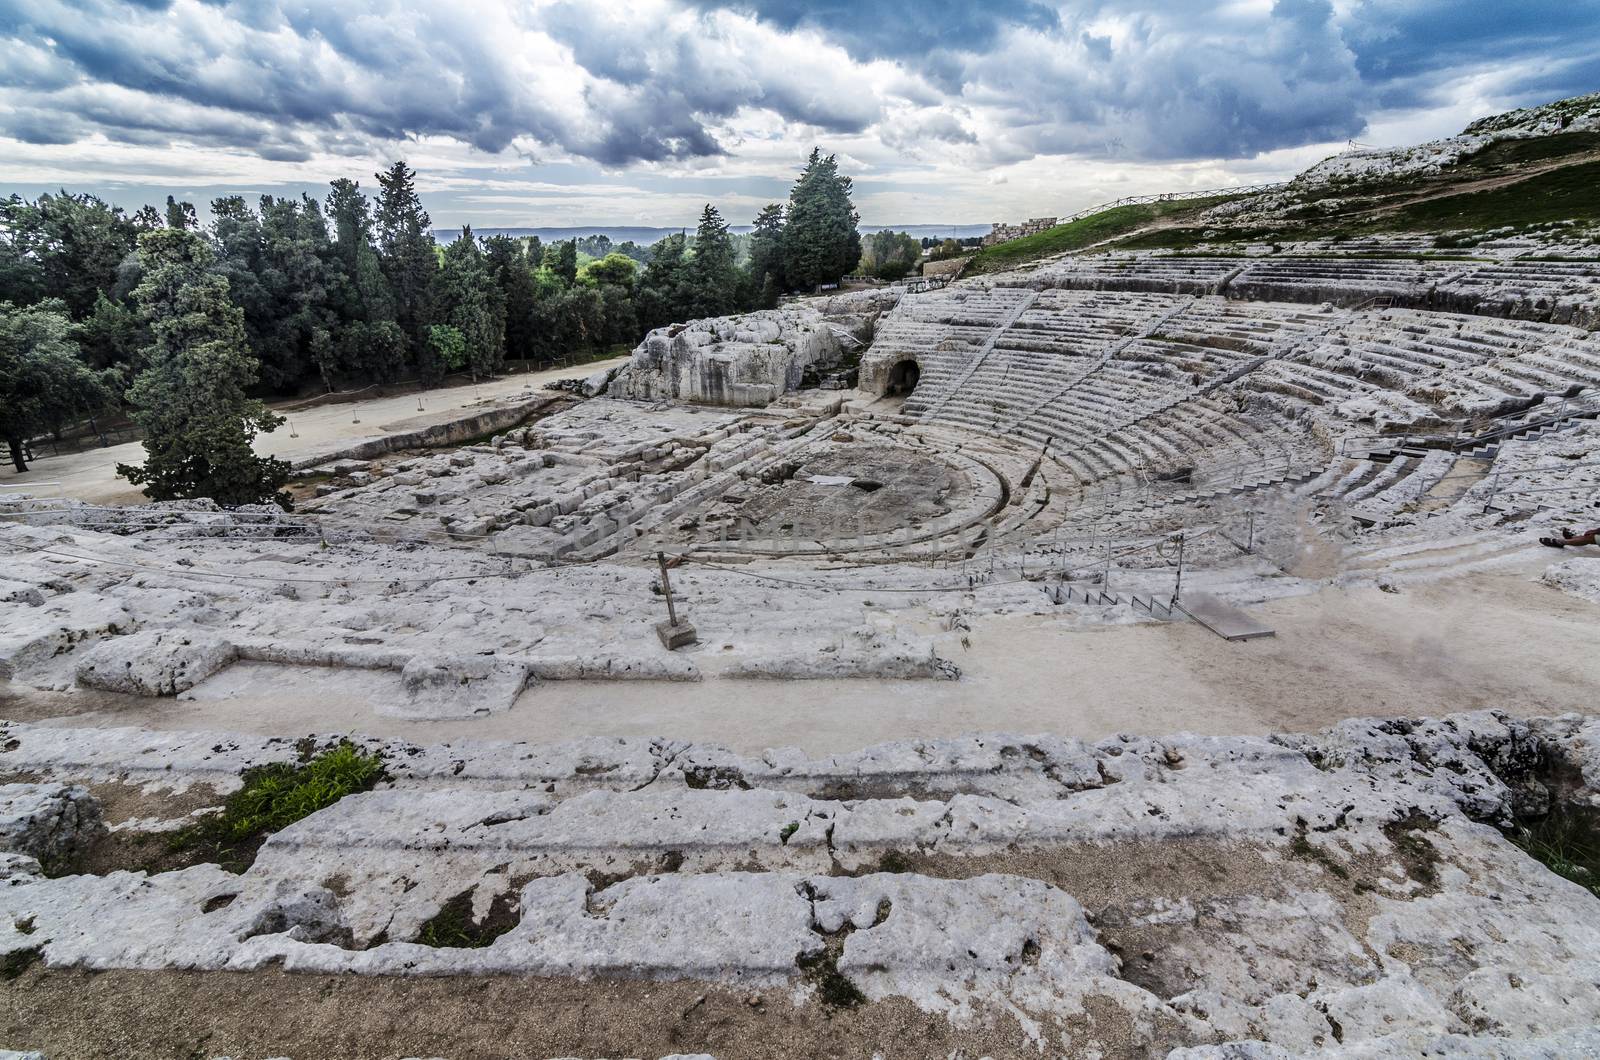 Panoramic view and detail of the ancient and historic roman amphitheater of syracuse on the island of sicily italy